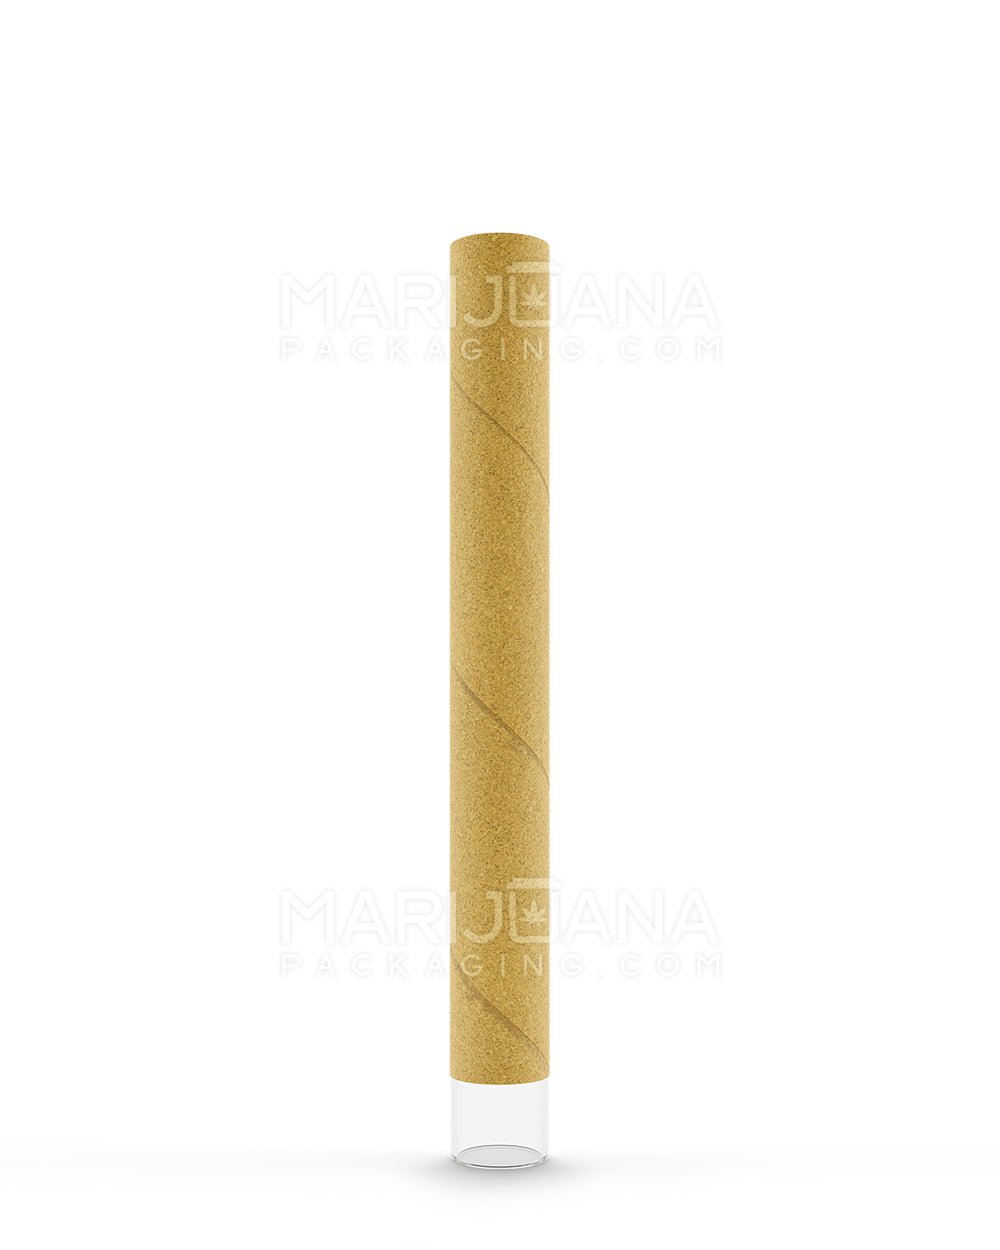 CROP KINGZ | King Size Glass Tipped Pre-Rolled Blunt Cones | 109mm - Organic Hemp - 110 Count - 1